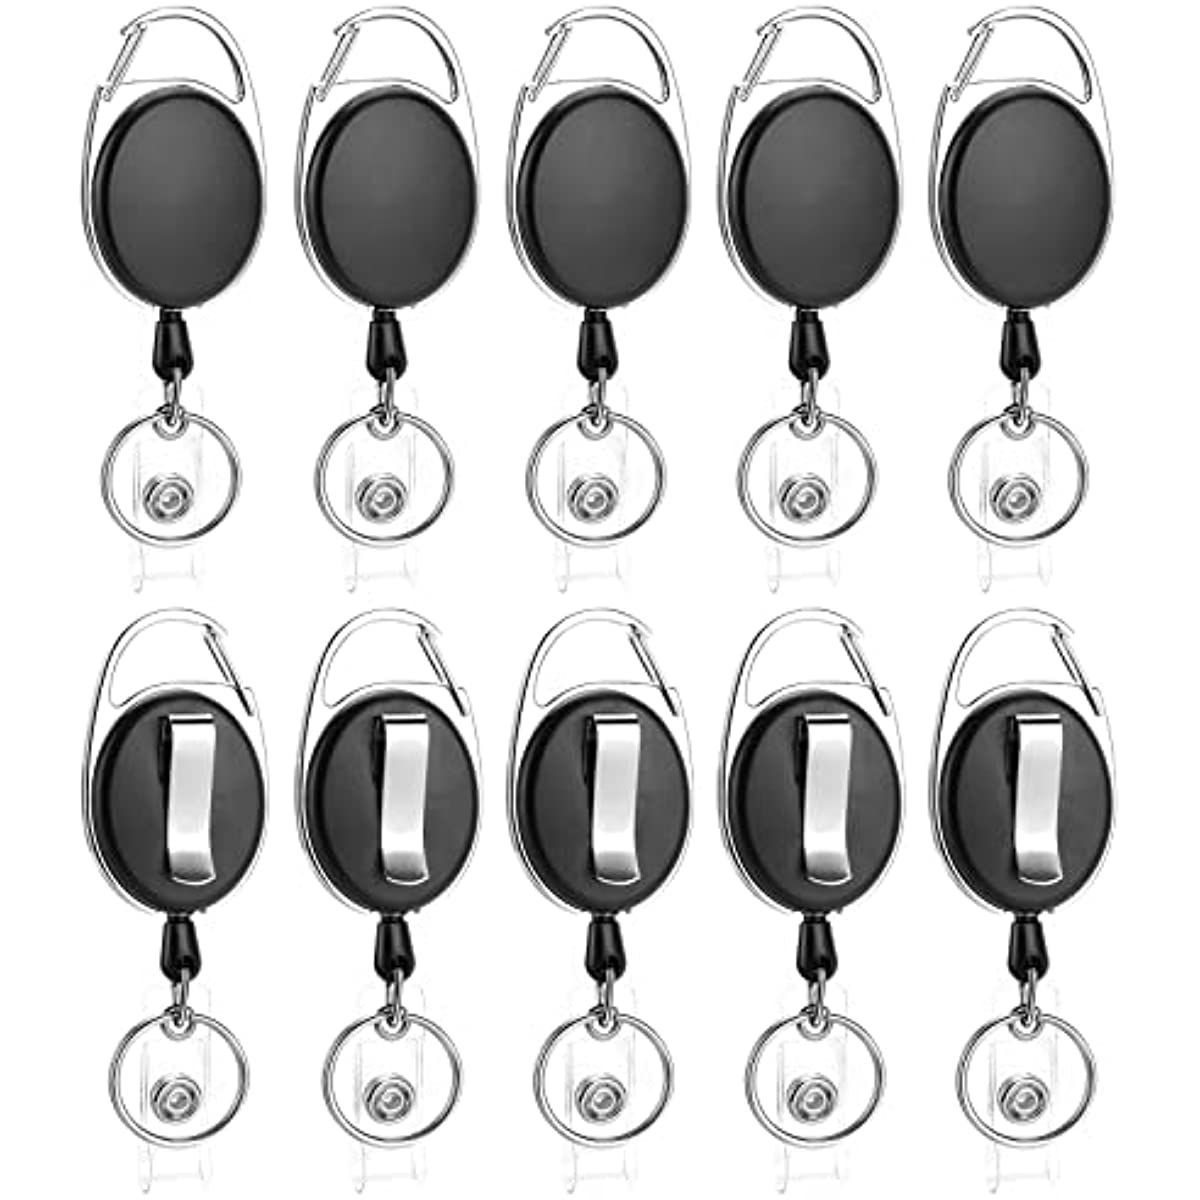 20 Pieces Retractable Badge Reel With Carabiner Belt Clip And Key Ring Retractable ID Badge Holders For ID Card Name Keychain